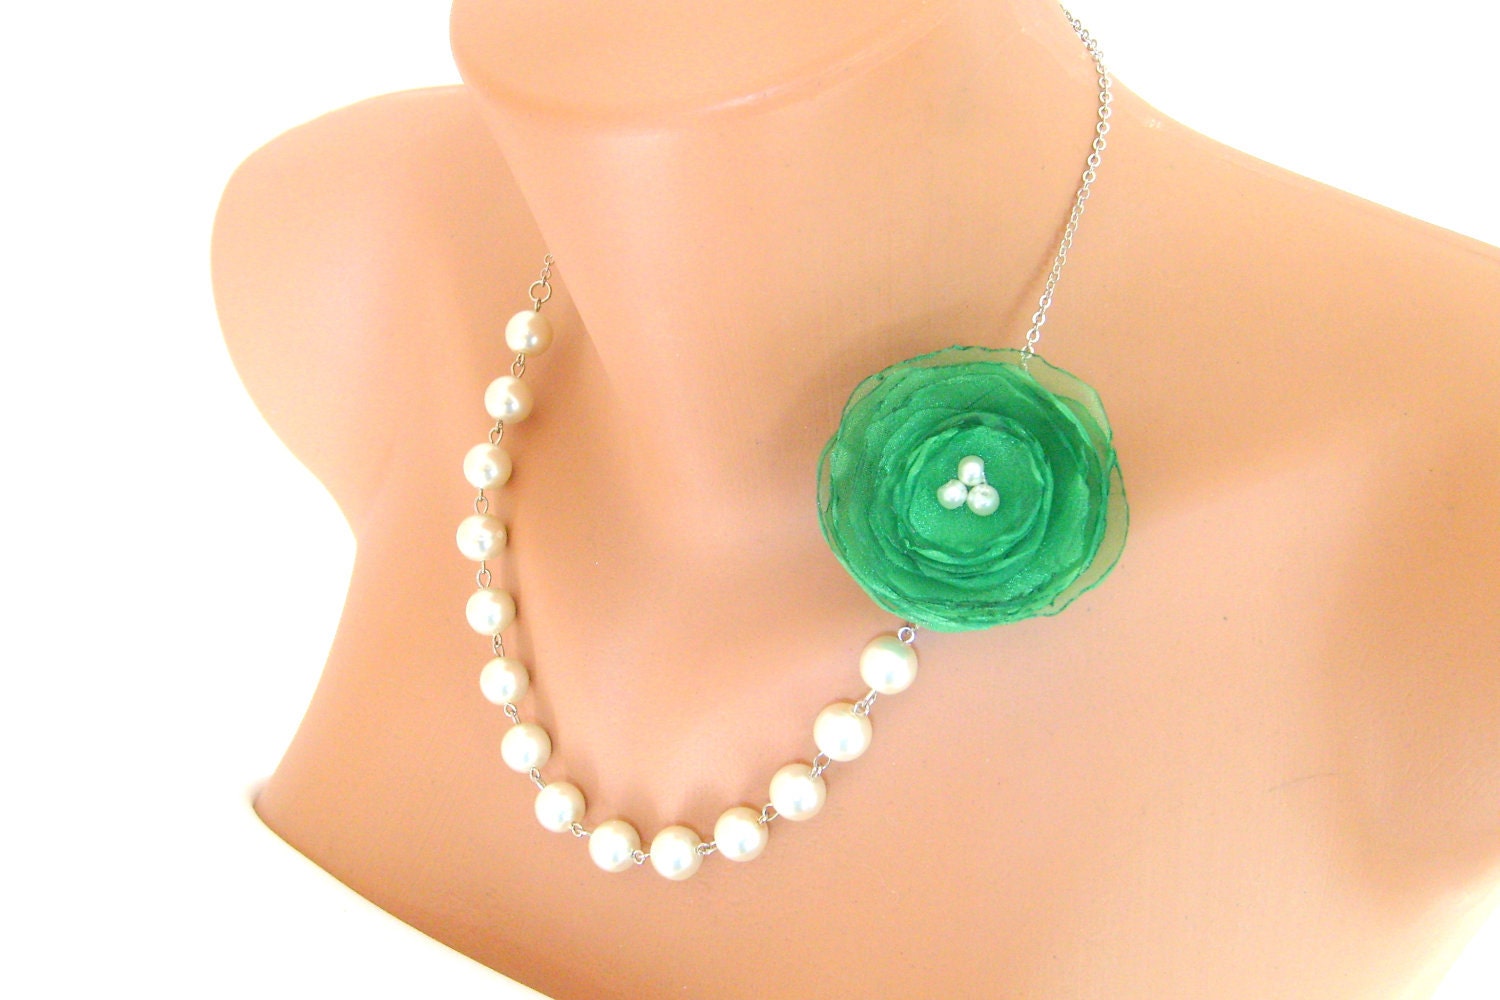 emerald green organza flower wedding necklace designed with ivory pearls bridal jewelry bridesmaid gift wedding jewelry